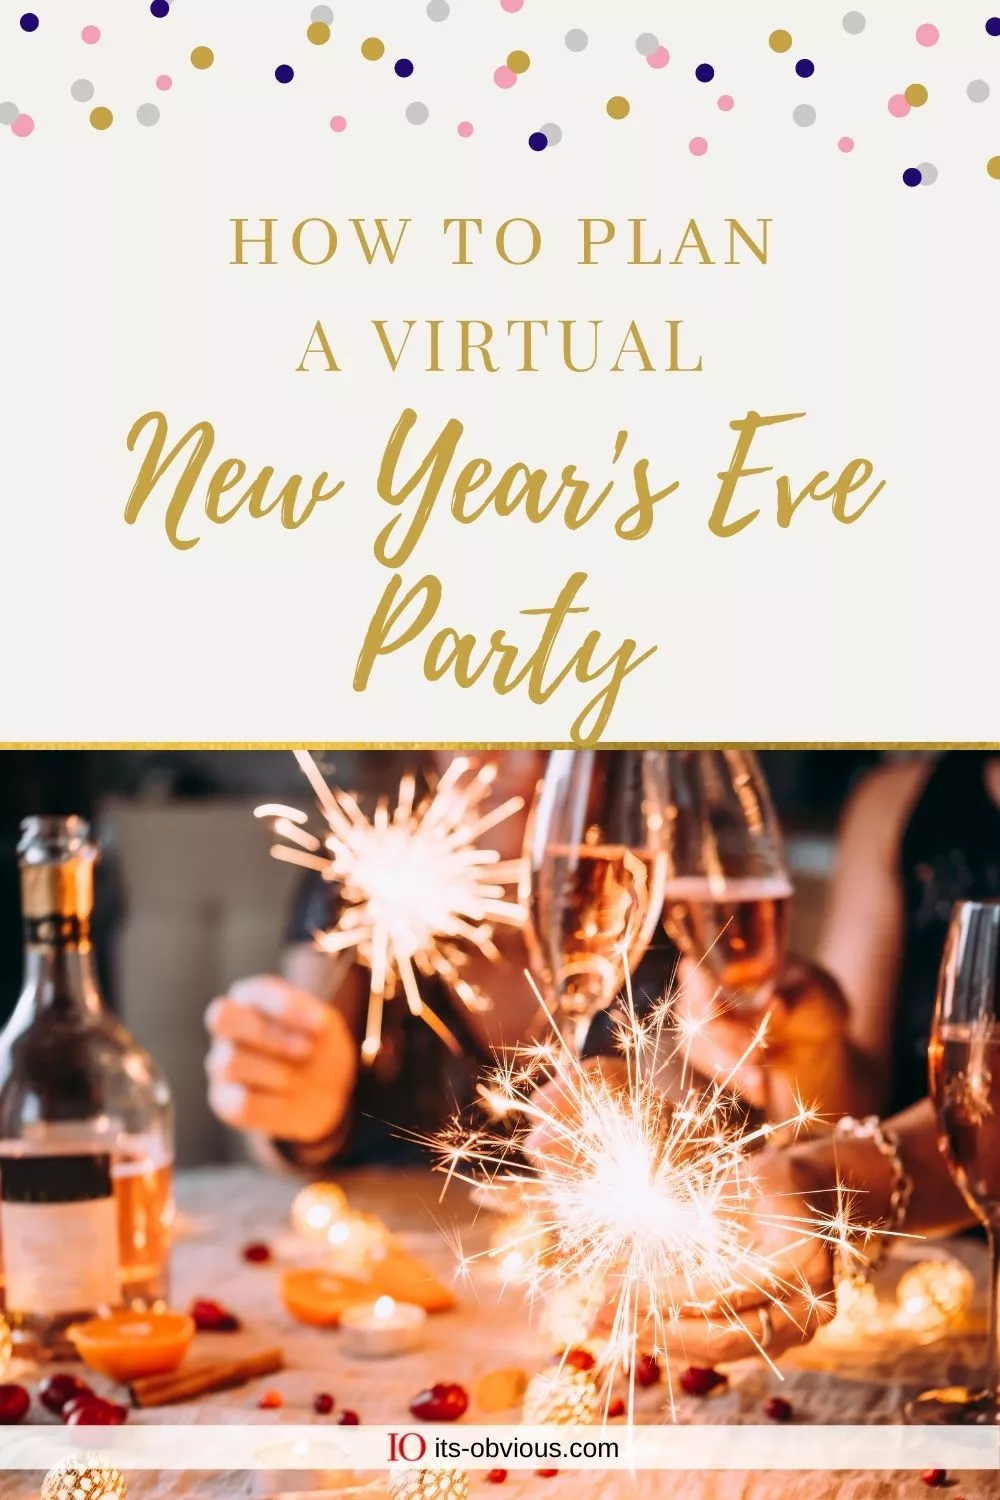 How to plan a Virtual New Year's Eve Party